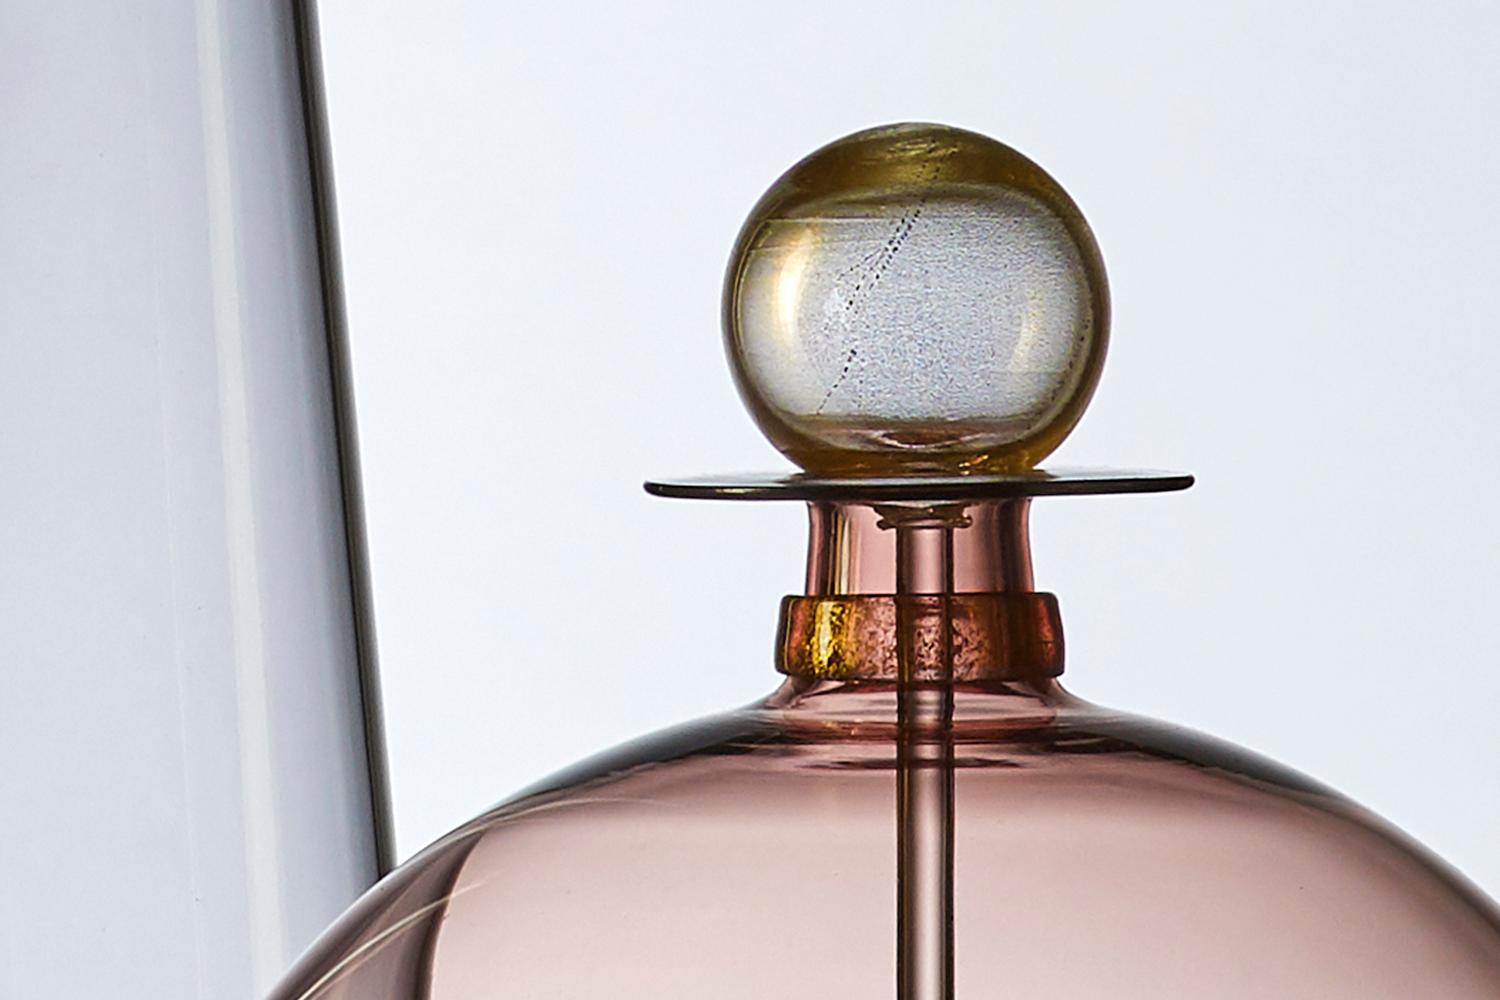 The modernist hand blown Jewel Bottle by Vetro Vero features rose tinted glass, and shimmering gold details. Inspired by apothecary collections and decanters of Mid-Century Modern design, the pink carafe makes a standalone statement or a stunning